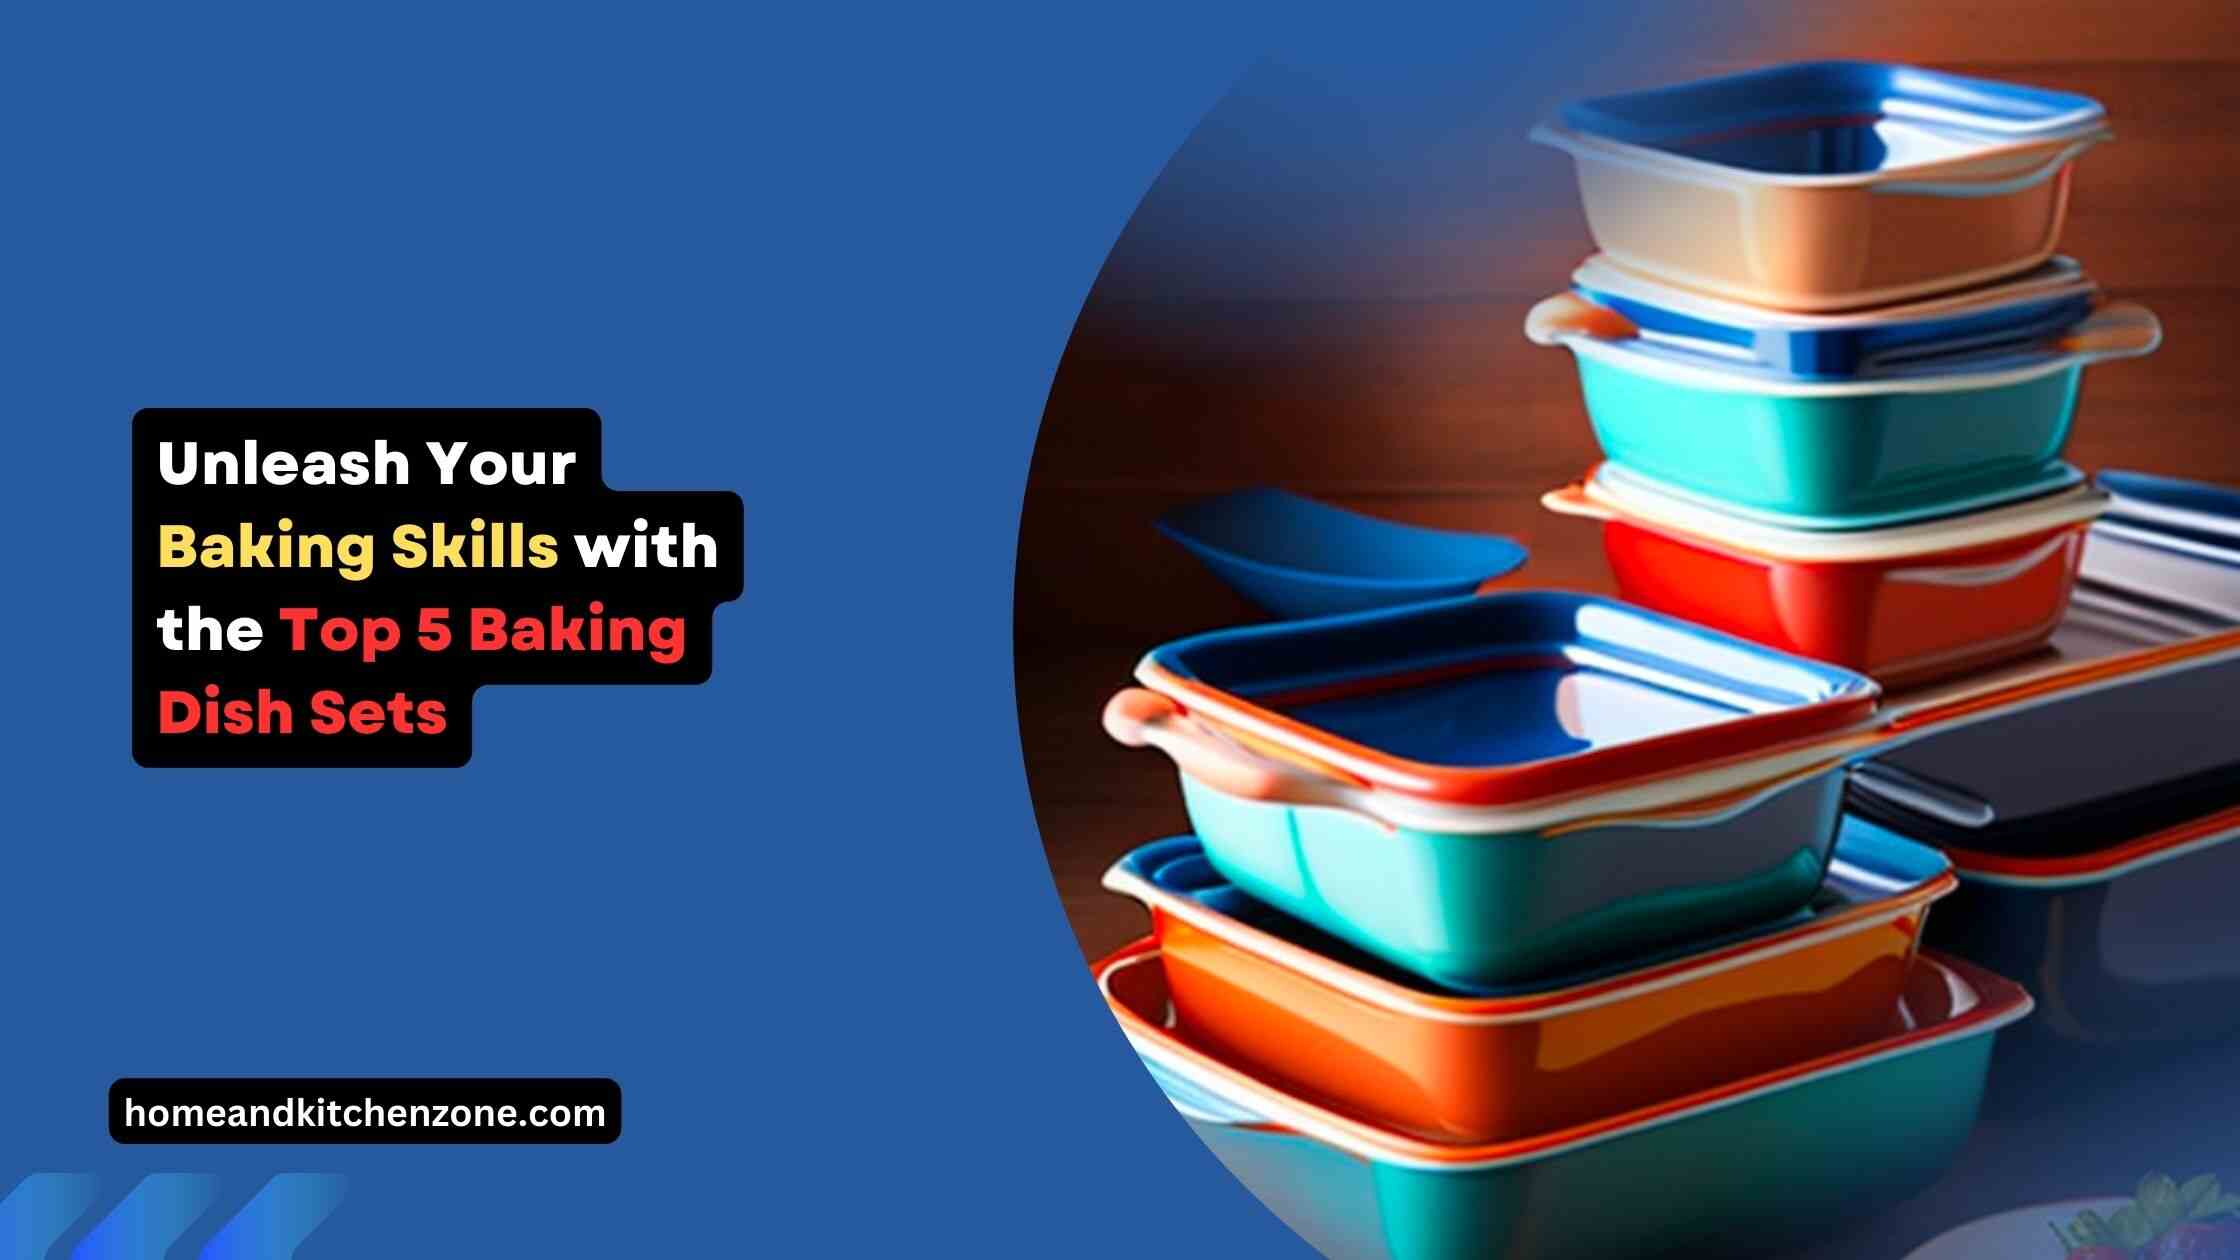 Unleash Your Baking Skills with the Top 5 Baking Dish Sets